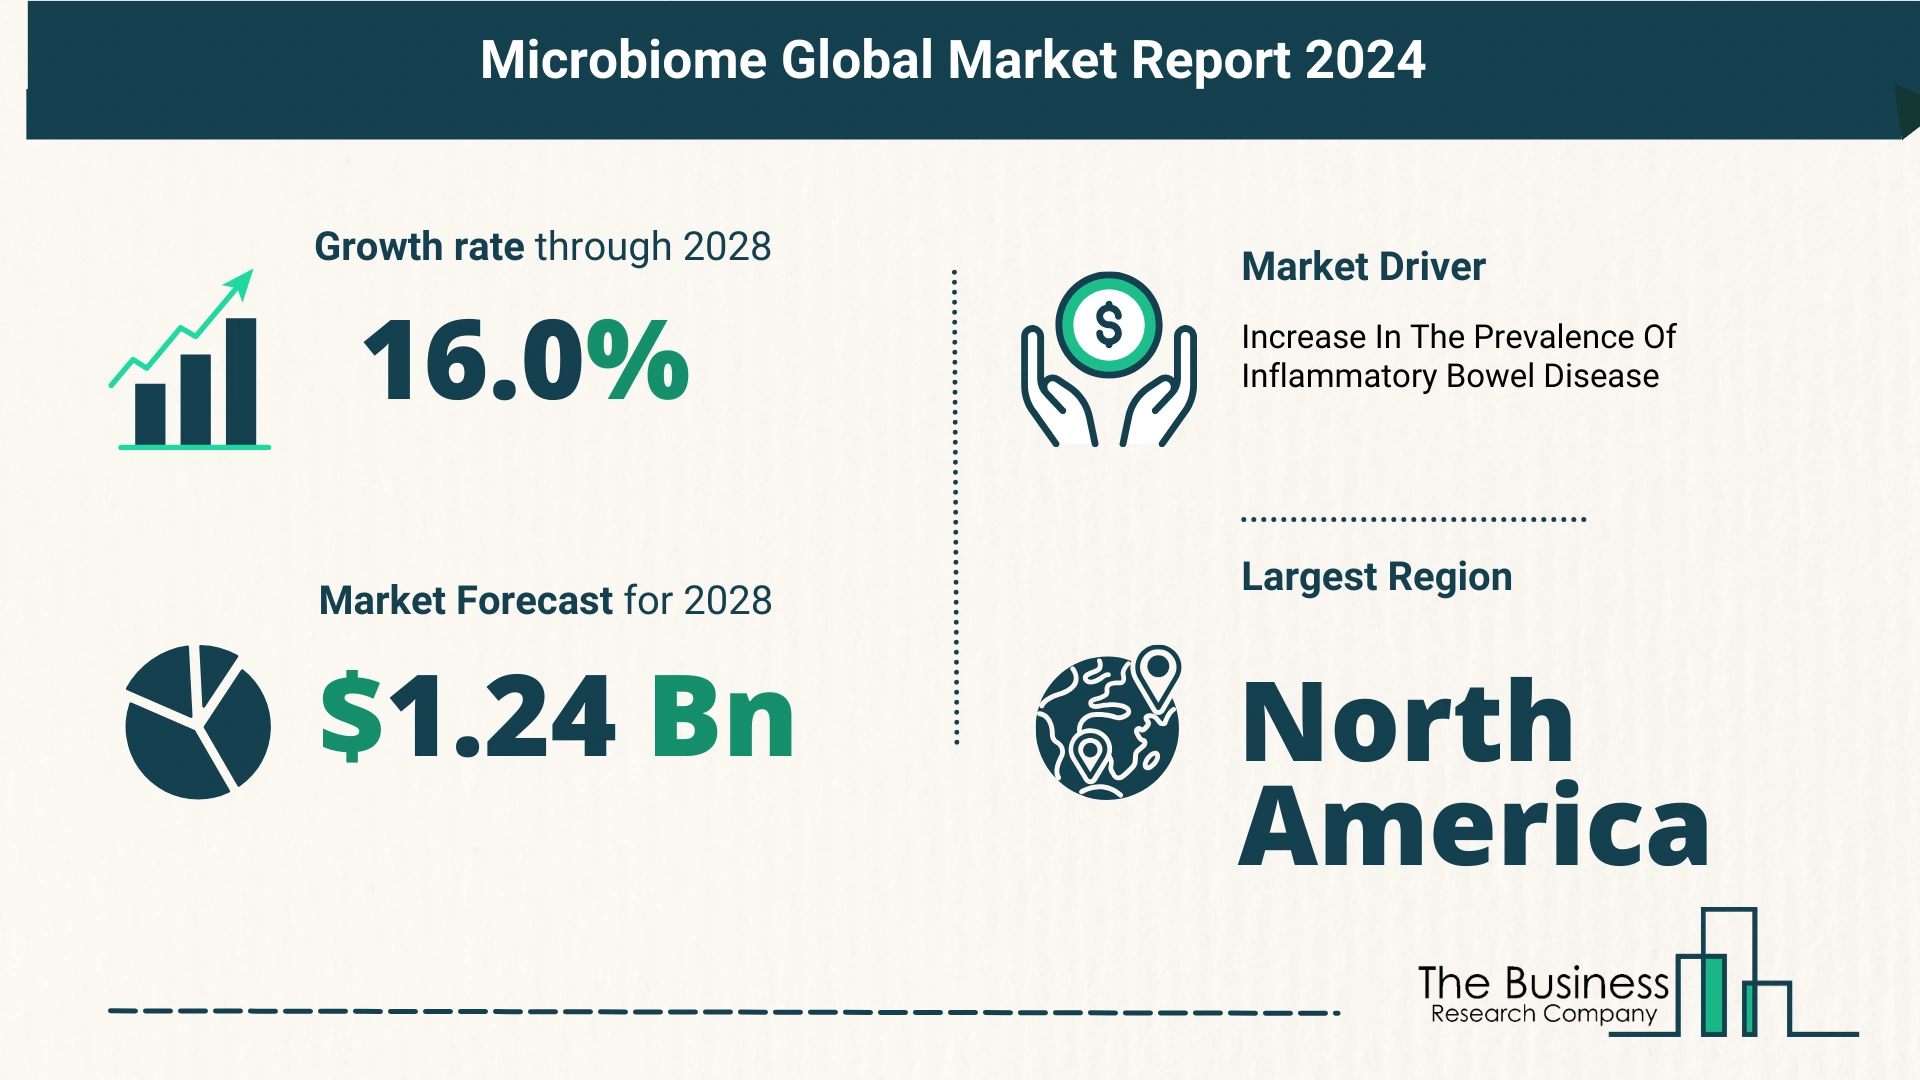 Global Microbiome Market Trends